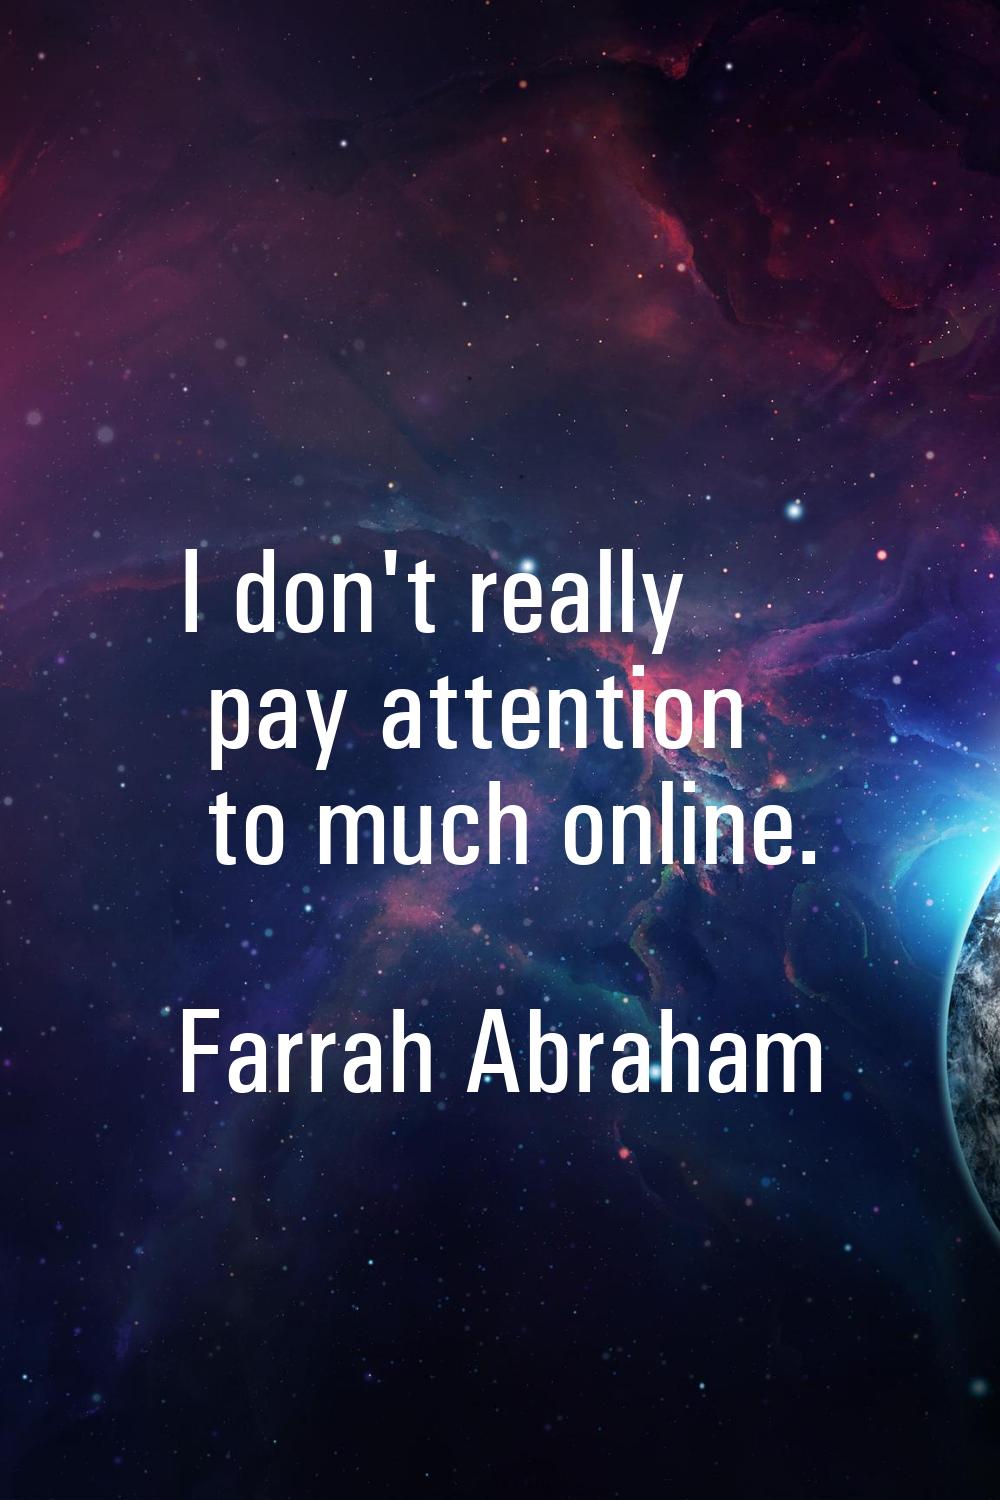 I don't really pay attention to much online.